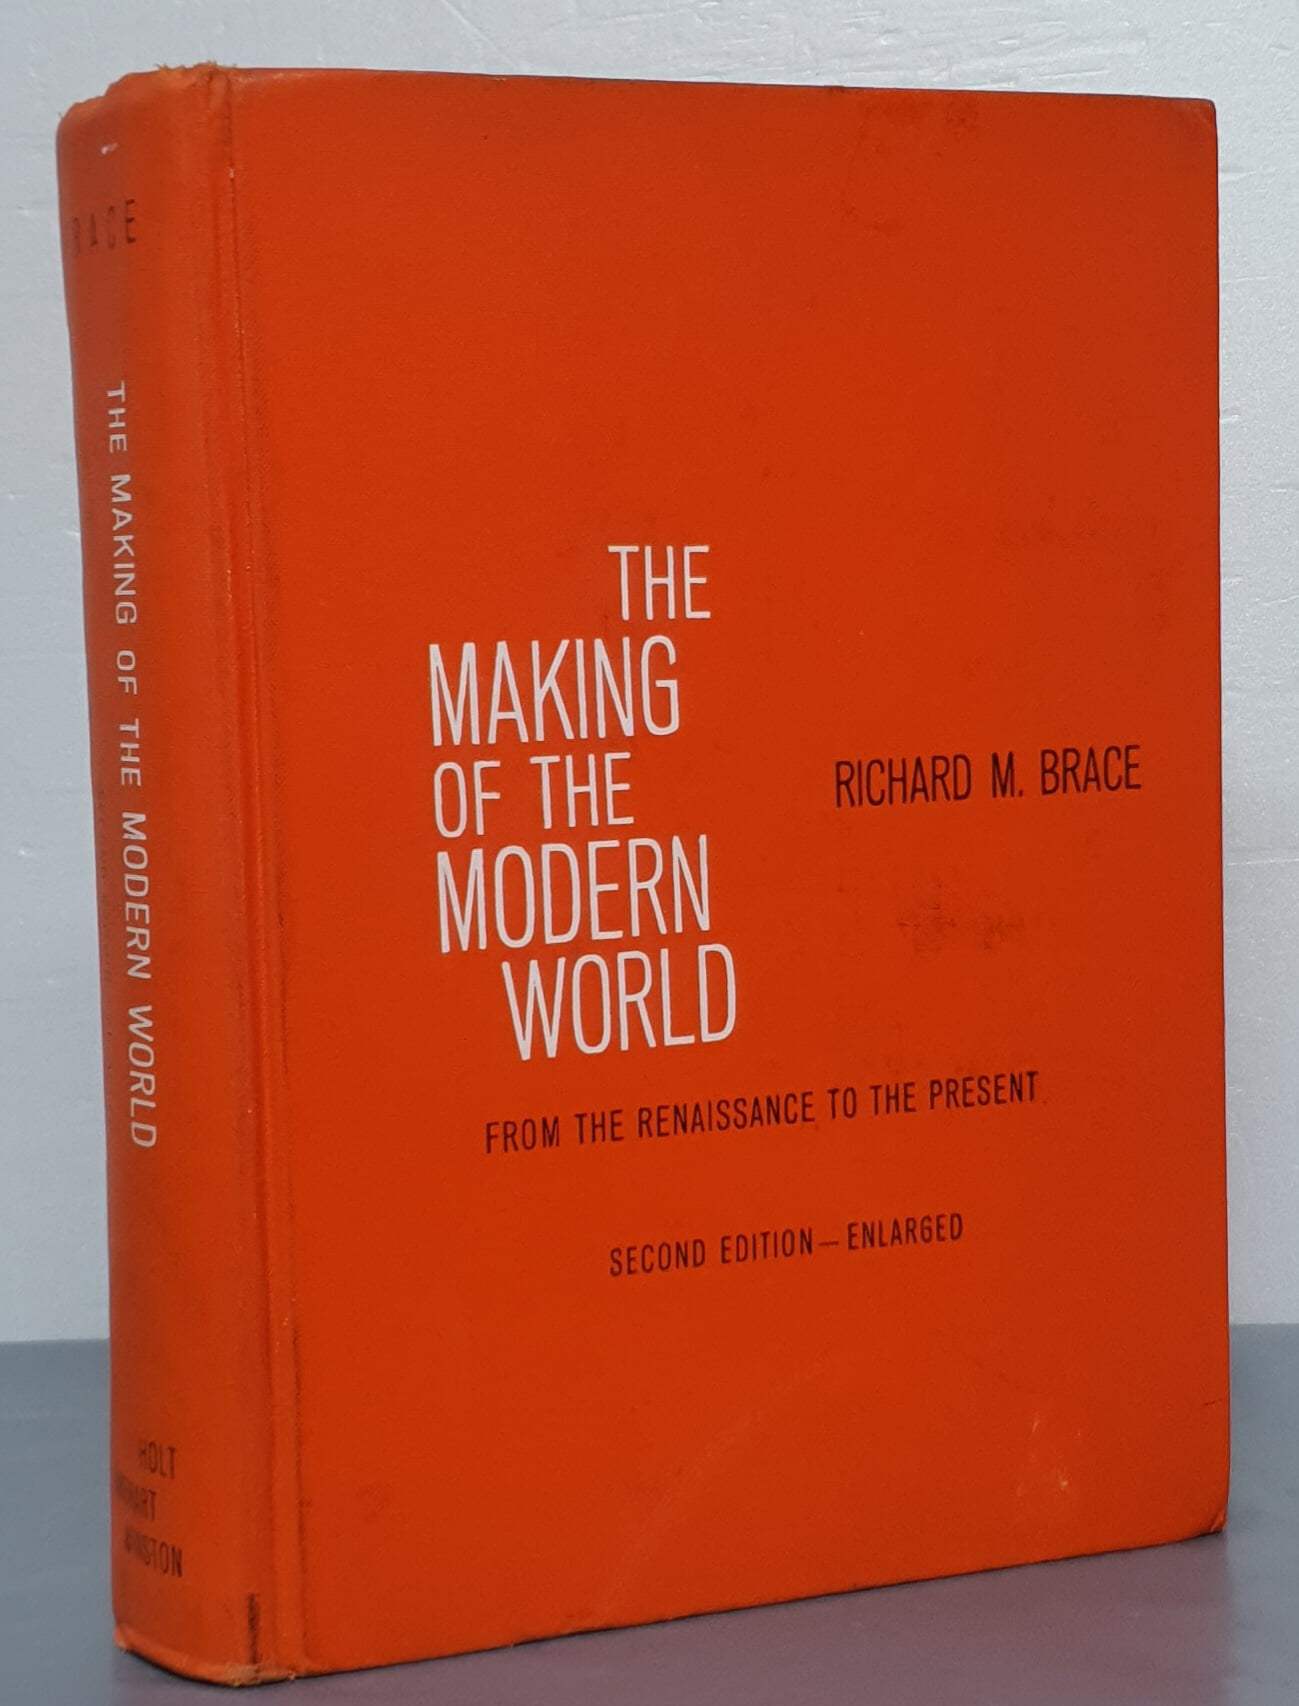 THE MAKING OF THE MODERN WORLD - FROM THE RENAISSANCE TO THE PRESENT (SECOND EDITION-ENLARGED)